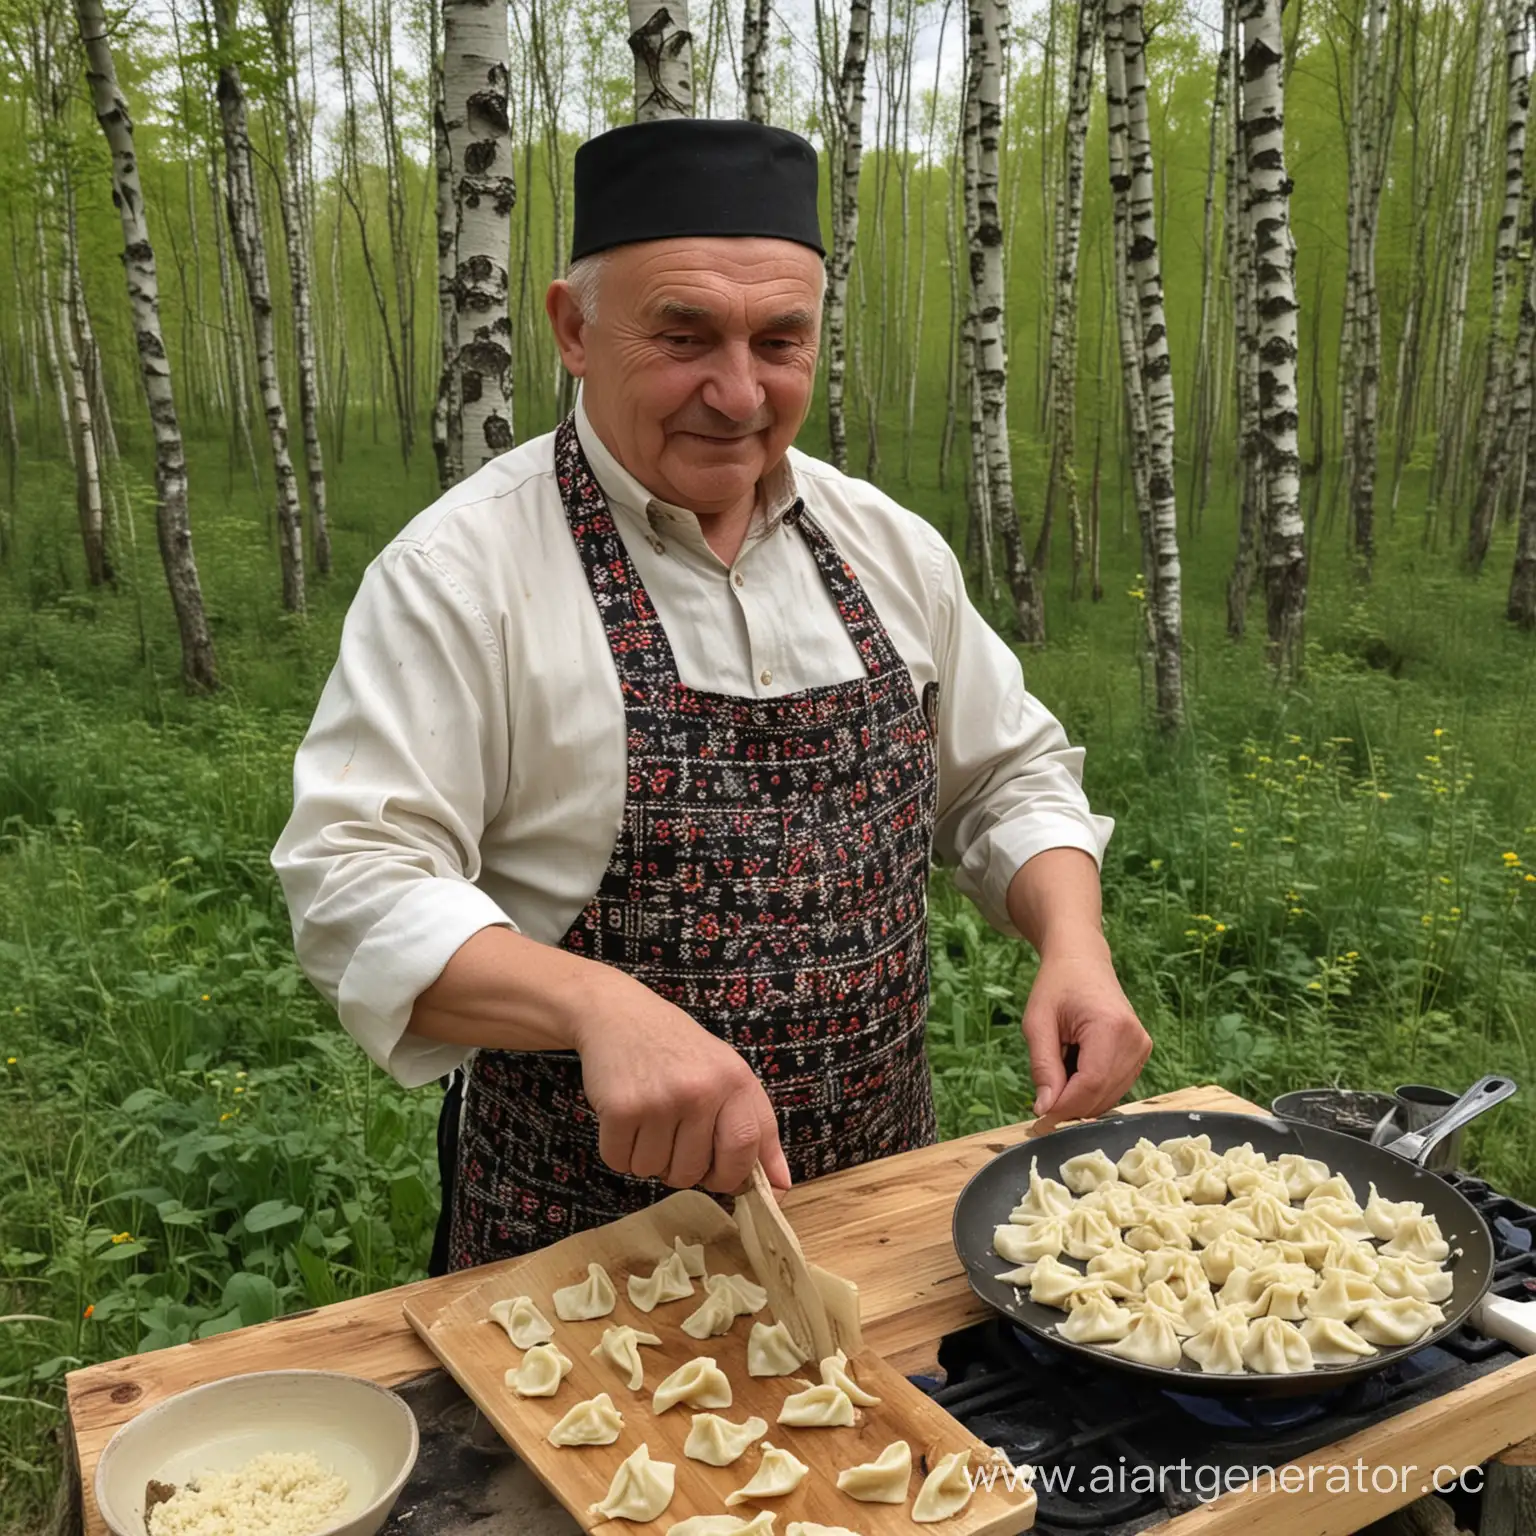 Uncle-Antos-Cooking-Dumplings-with-Birch-Sap-in-Traditional-Belarusian-Attire